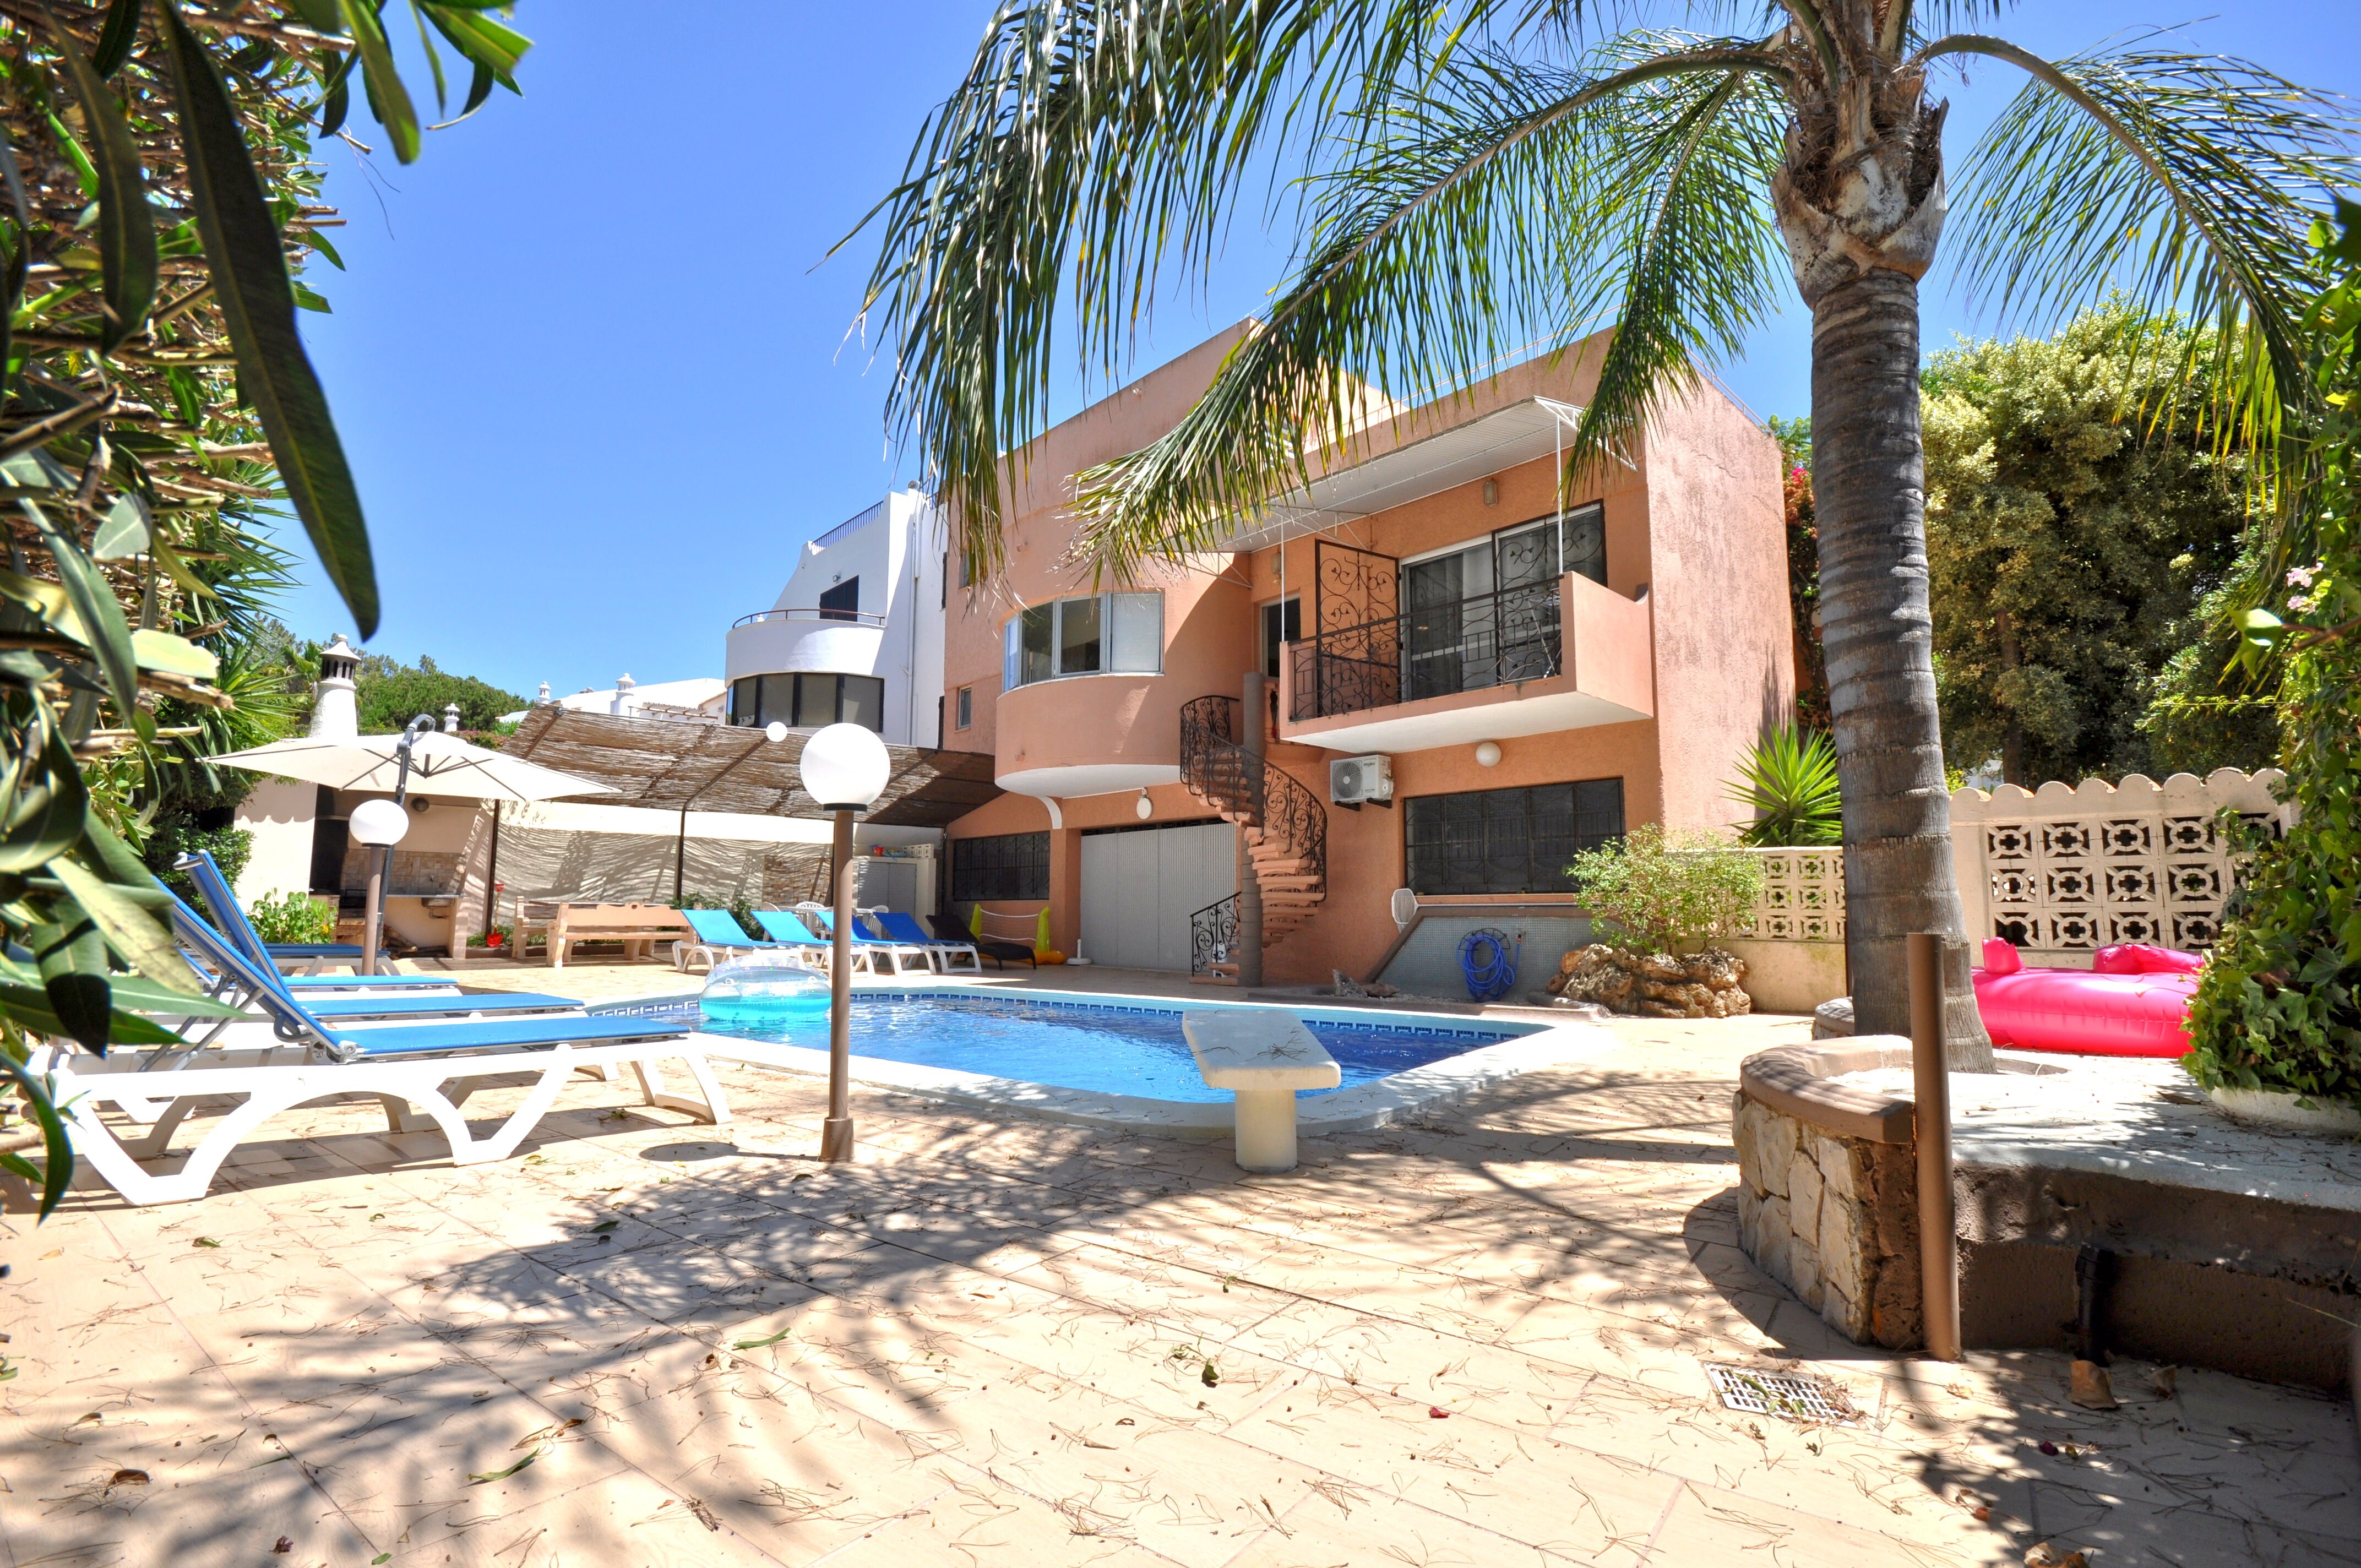 Property Image 1 - Walking Distance to the Centre - Snooker Table - Private pool - 5 bedrooms